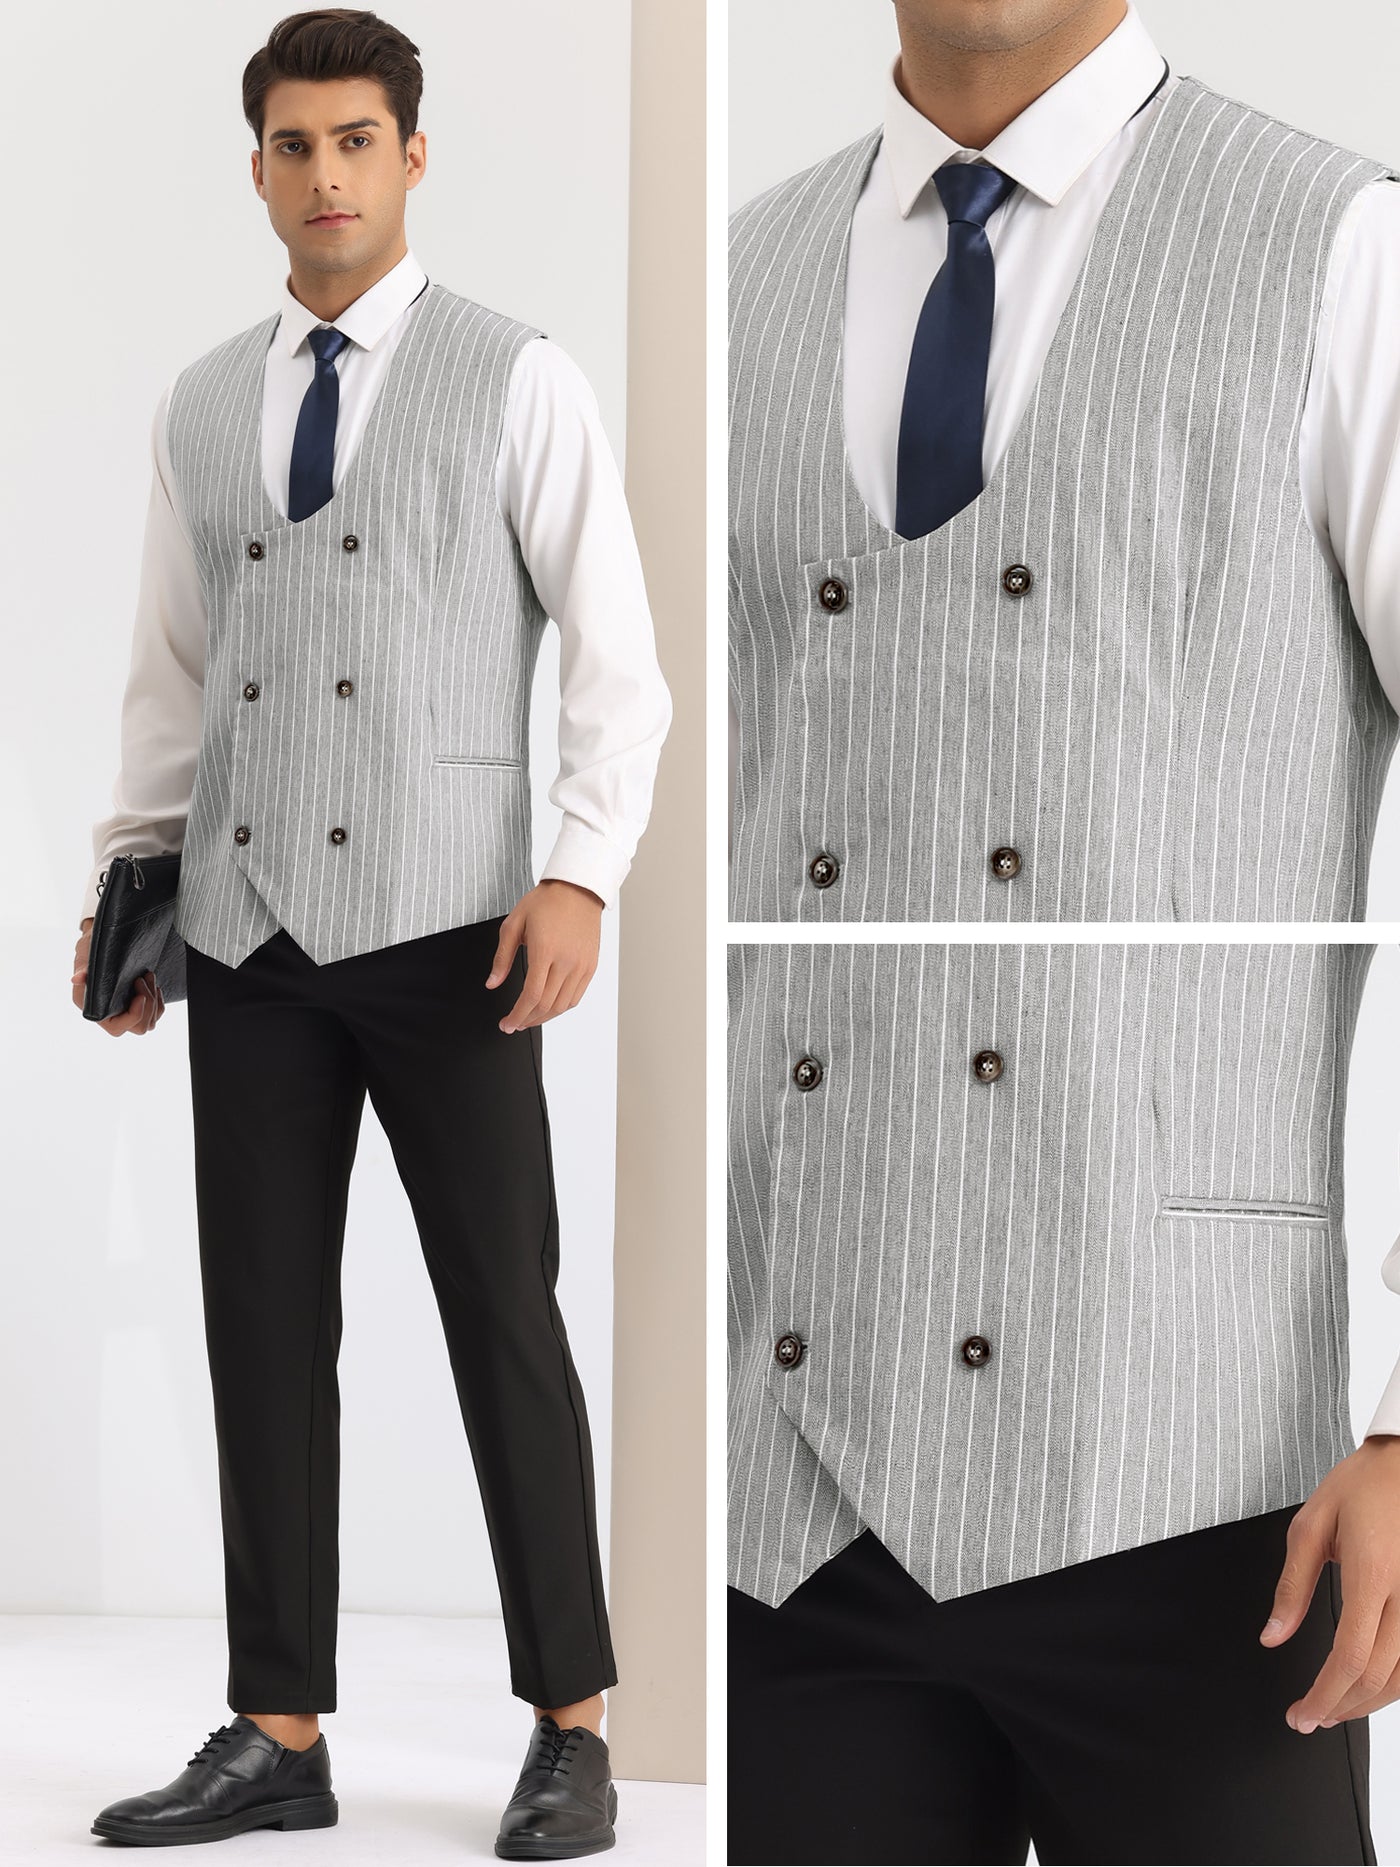 Bublédon Striped Waistcoat for Men's Slim Fit Double Breasted Formal Dress Suit Vests